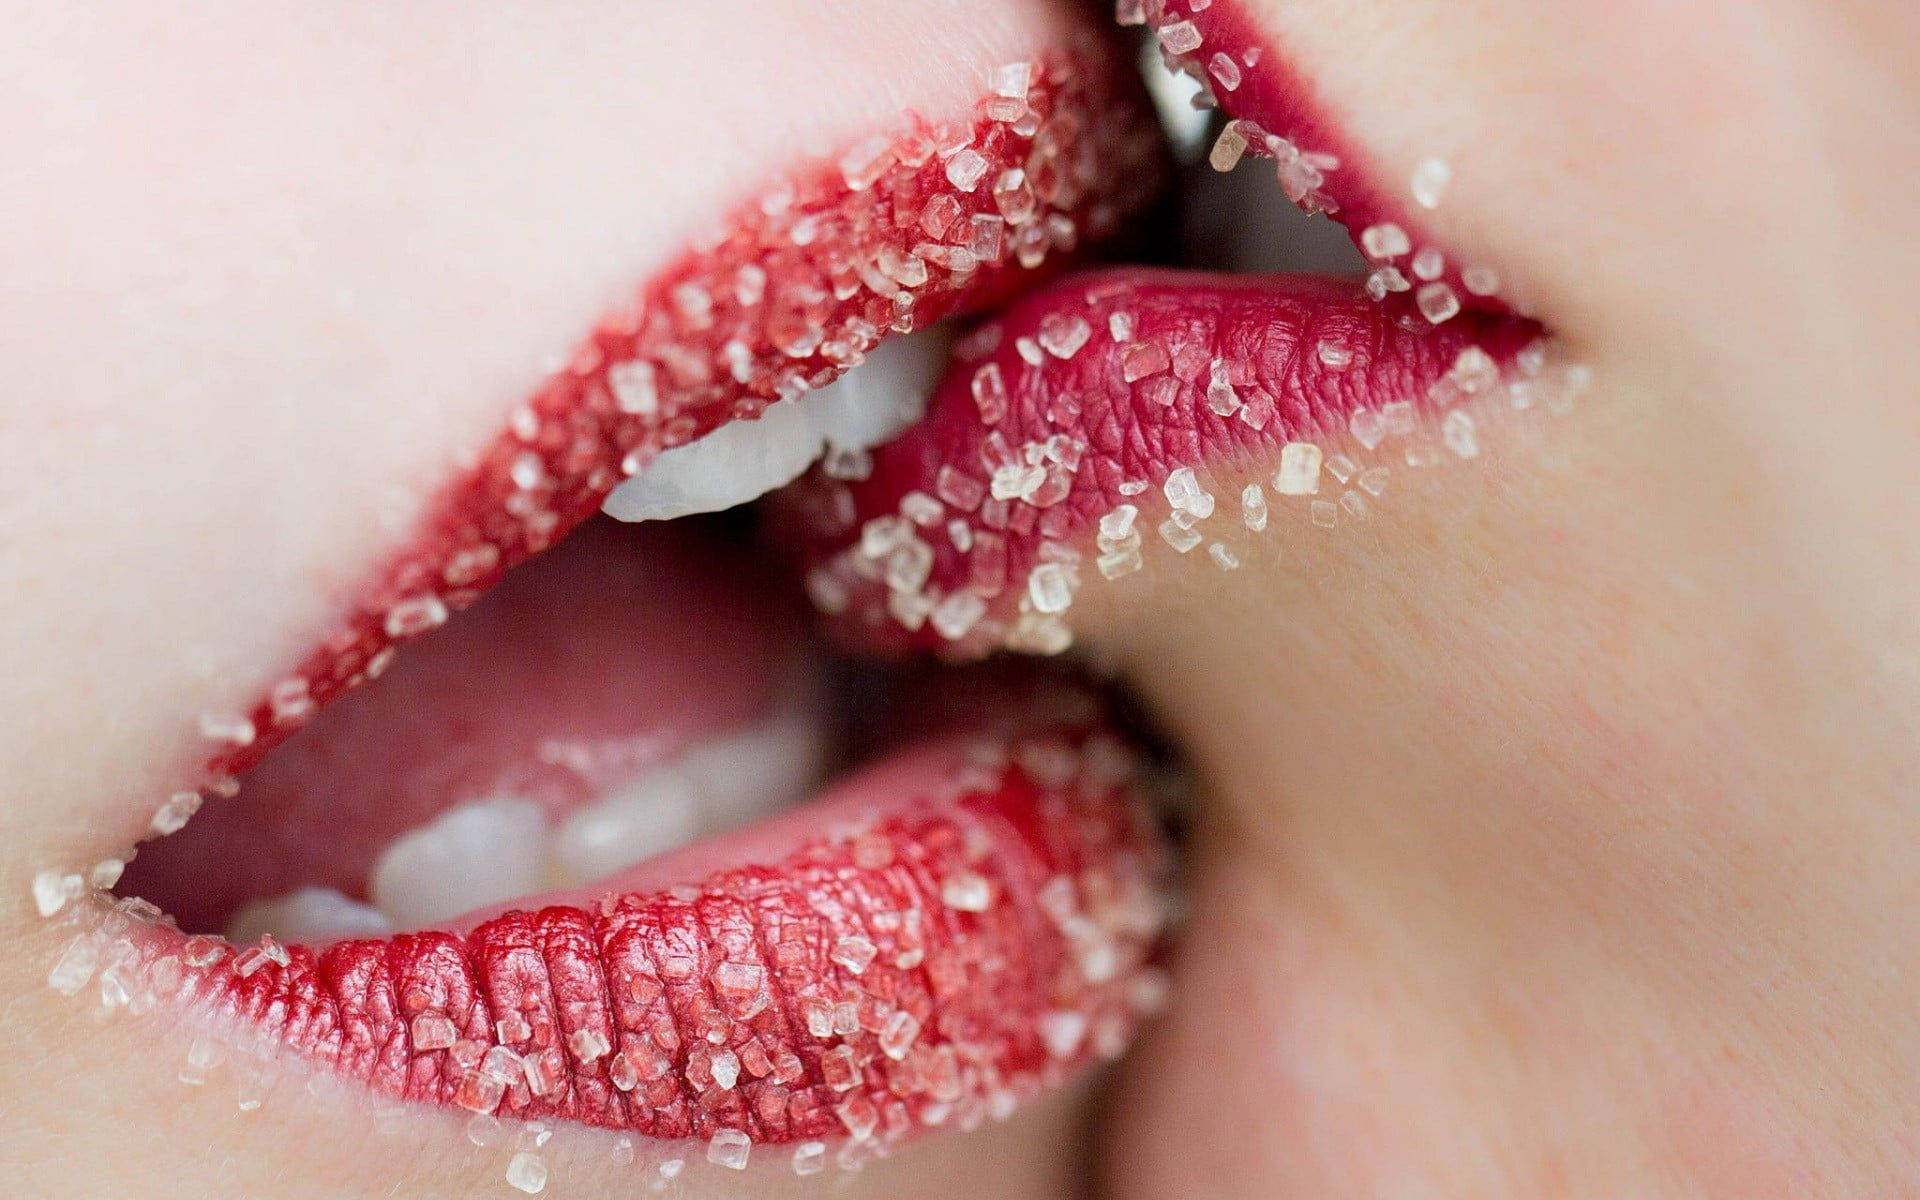 Women Kissing With Salted Lips Wallpaper